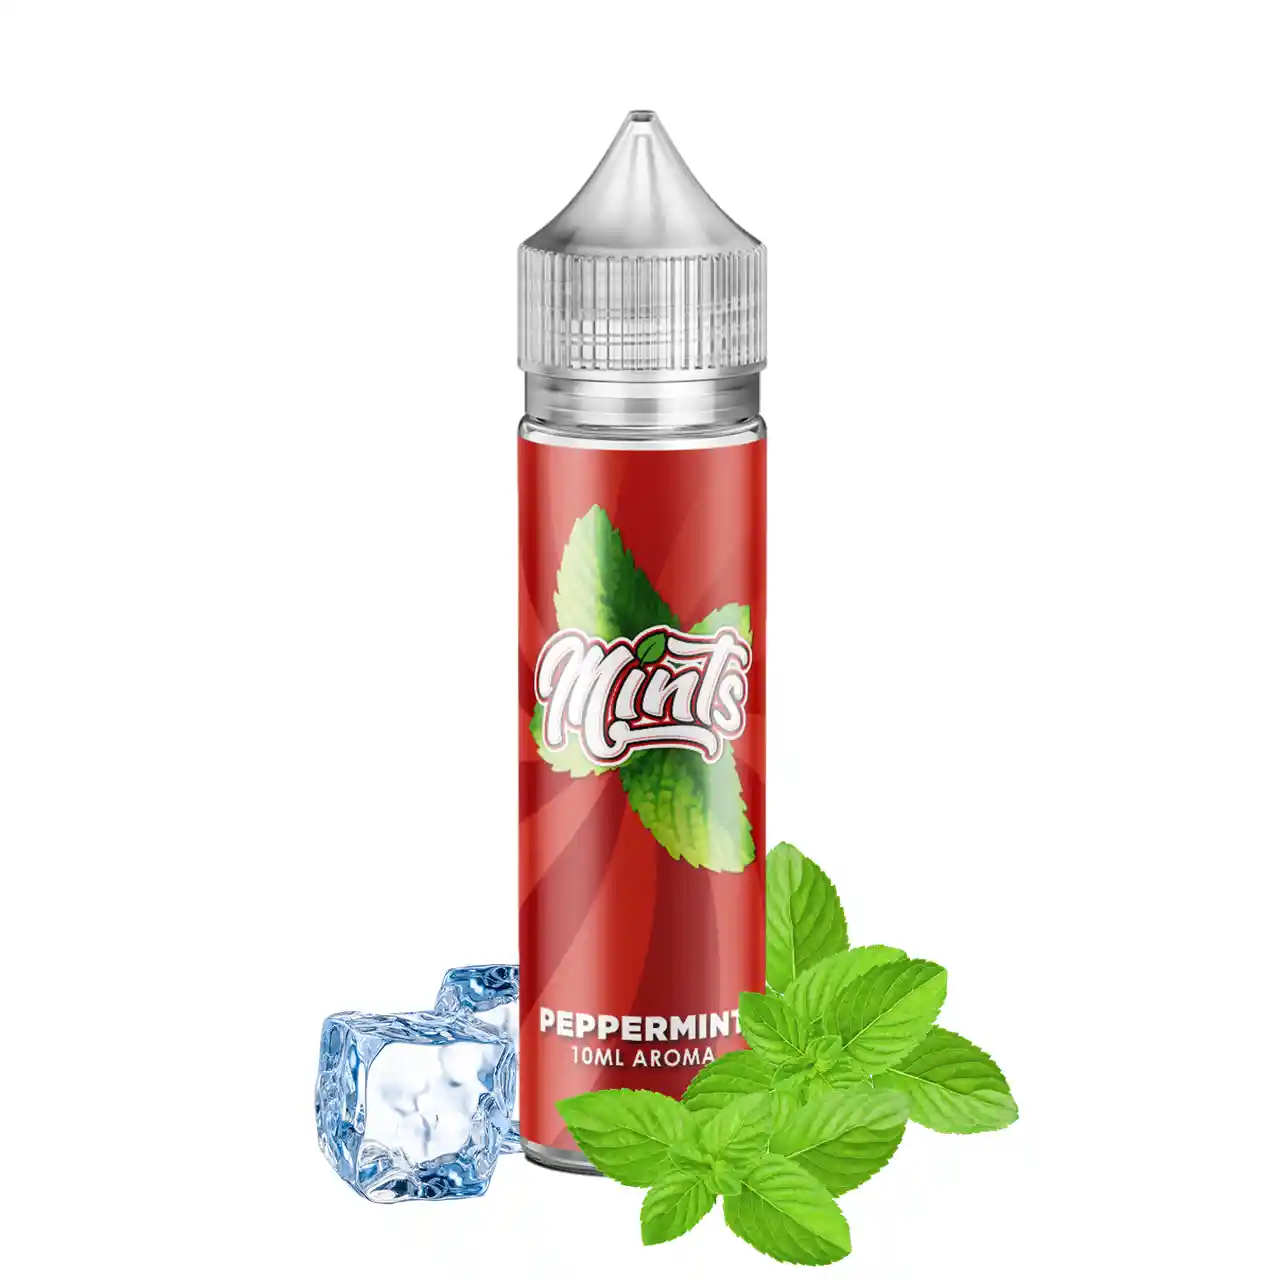 Mints Peppermint Aroma Longfill